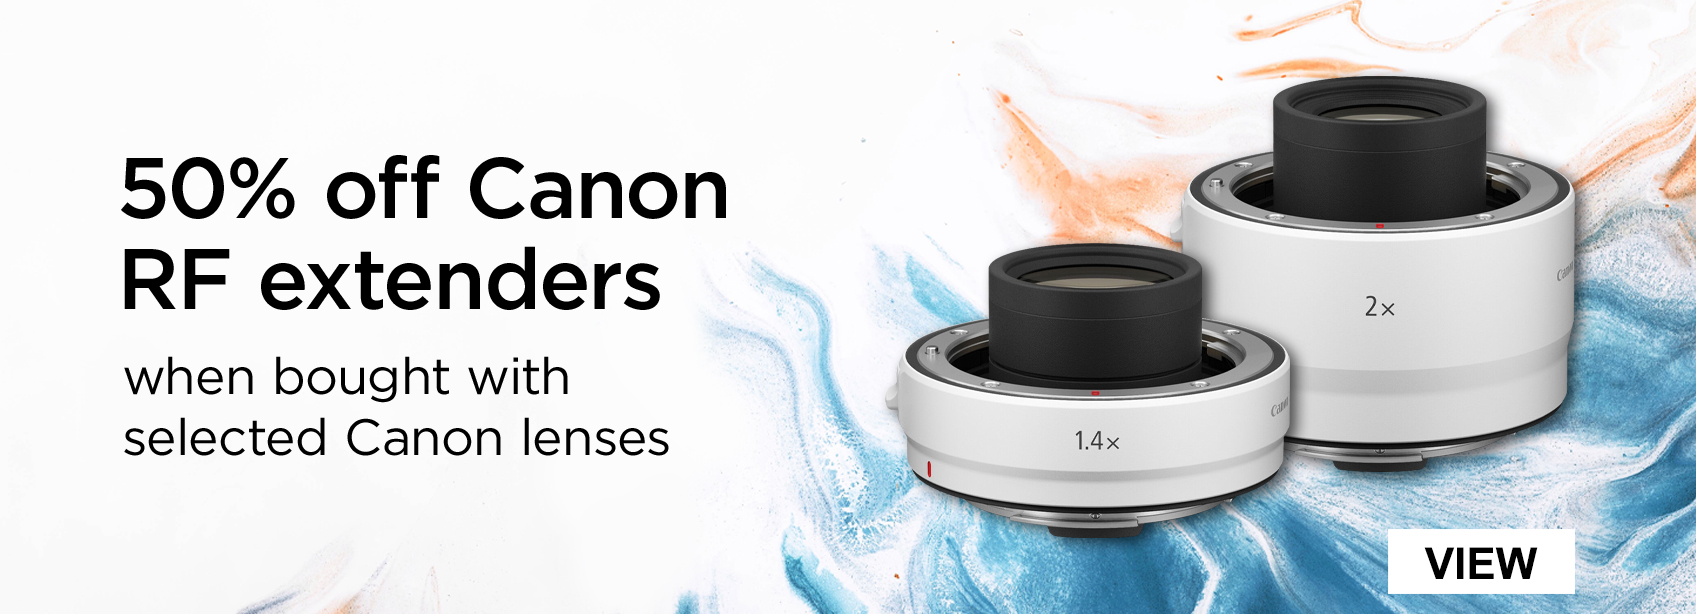 50% off Canon RF extenders when bought with selected Canon lenses